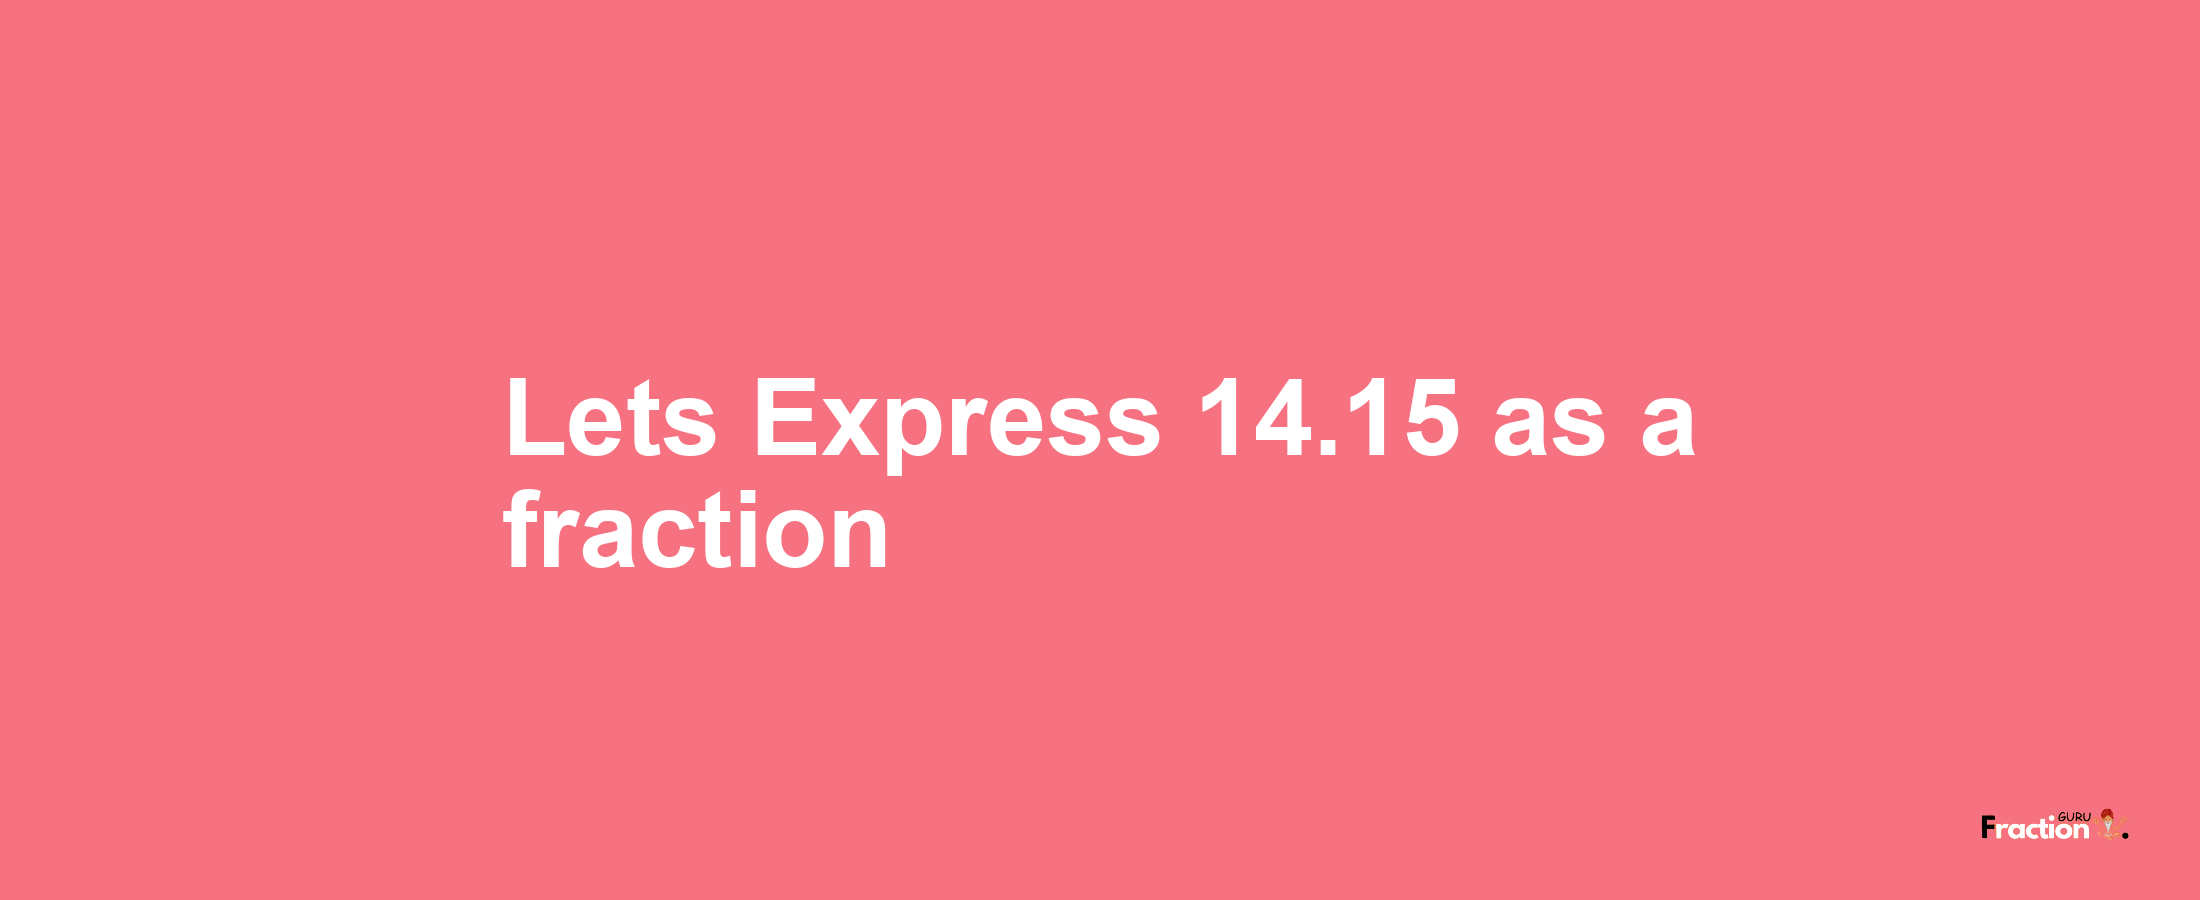 Lets Express 14.15 as afraction